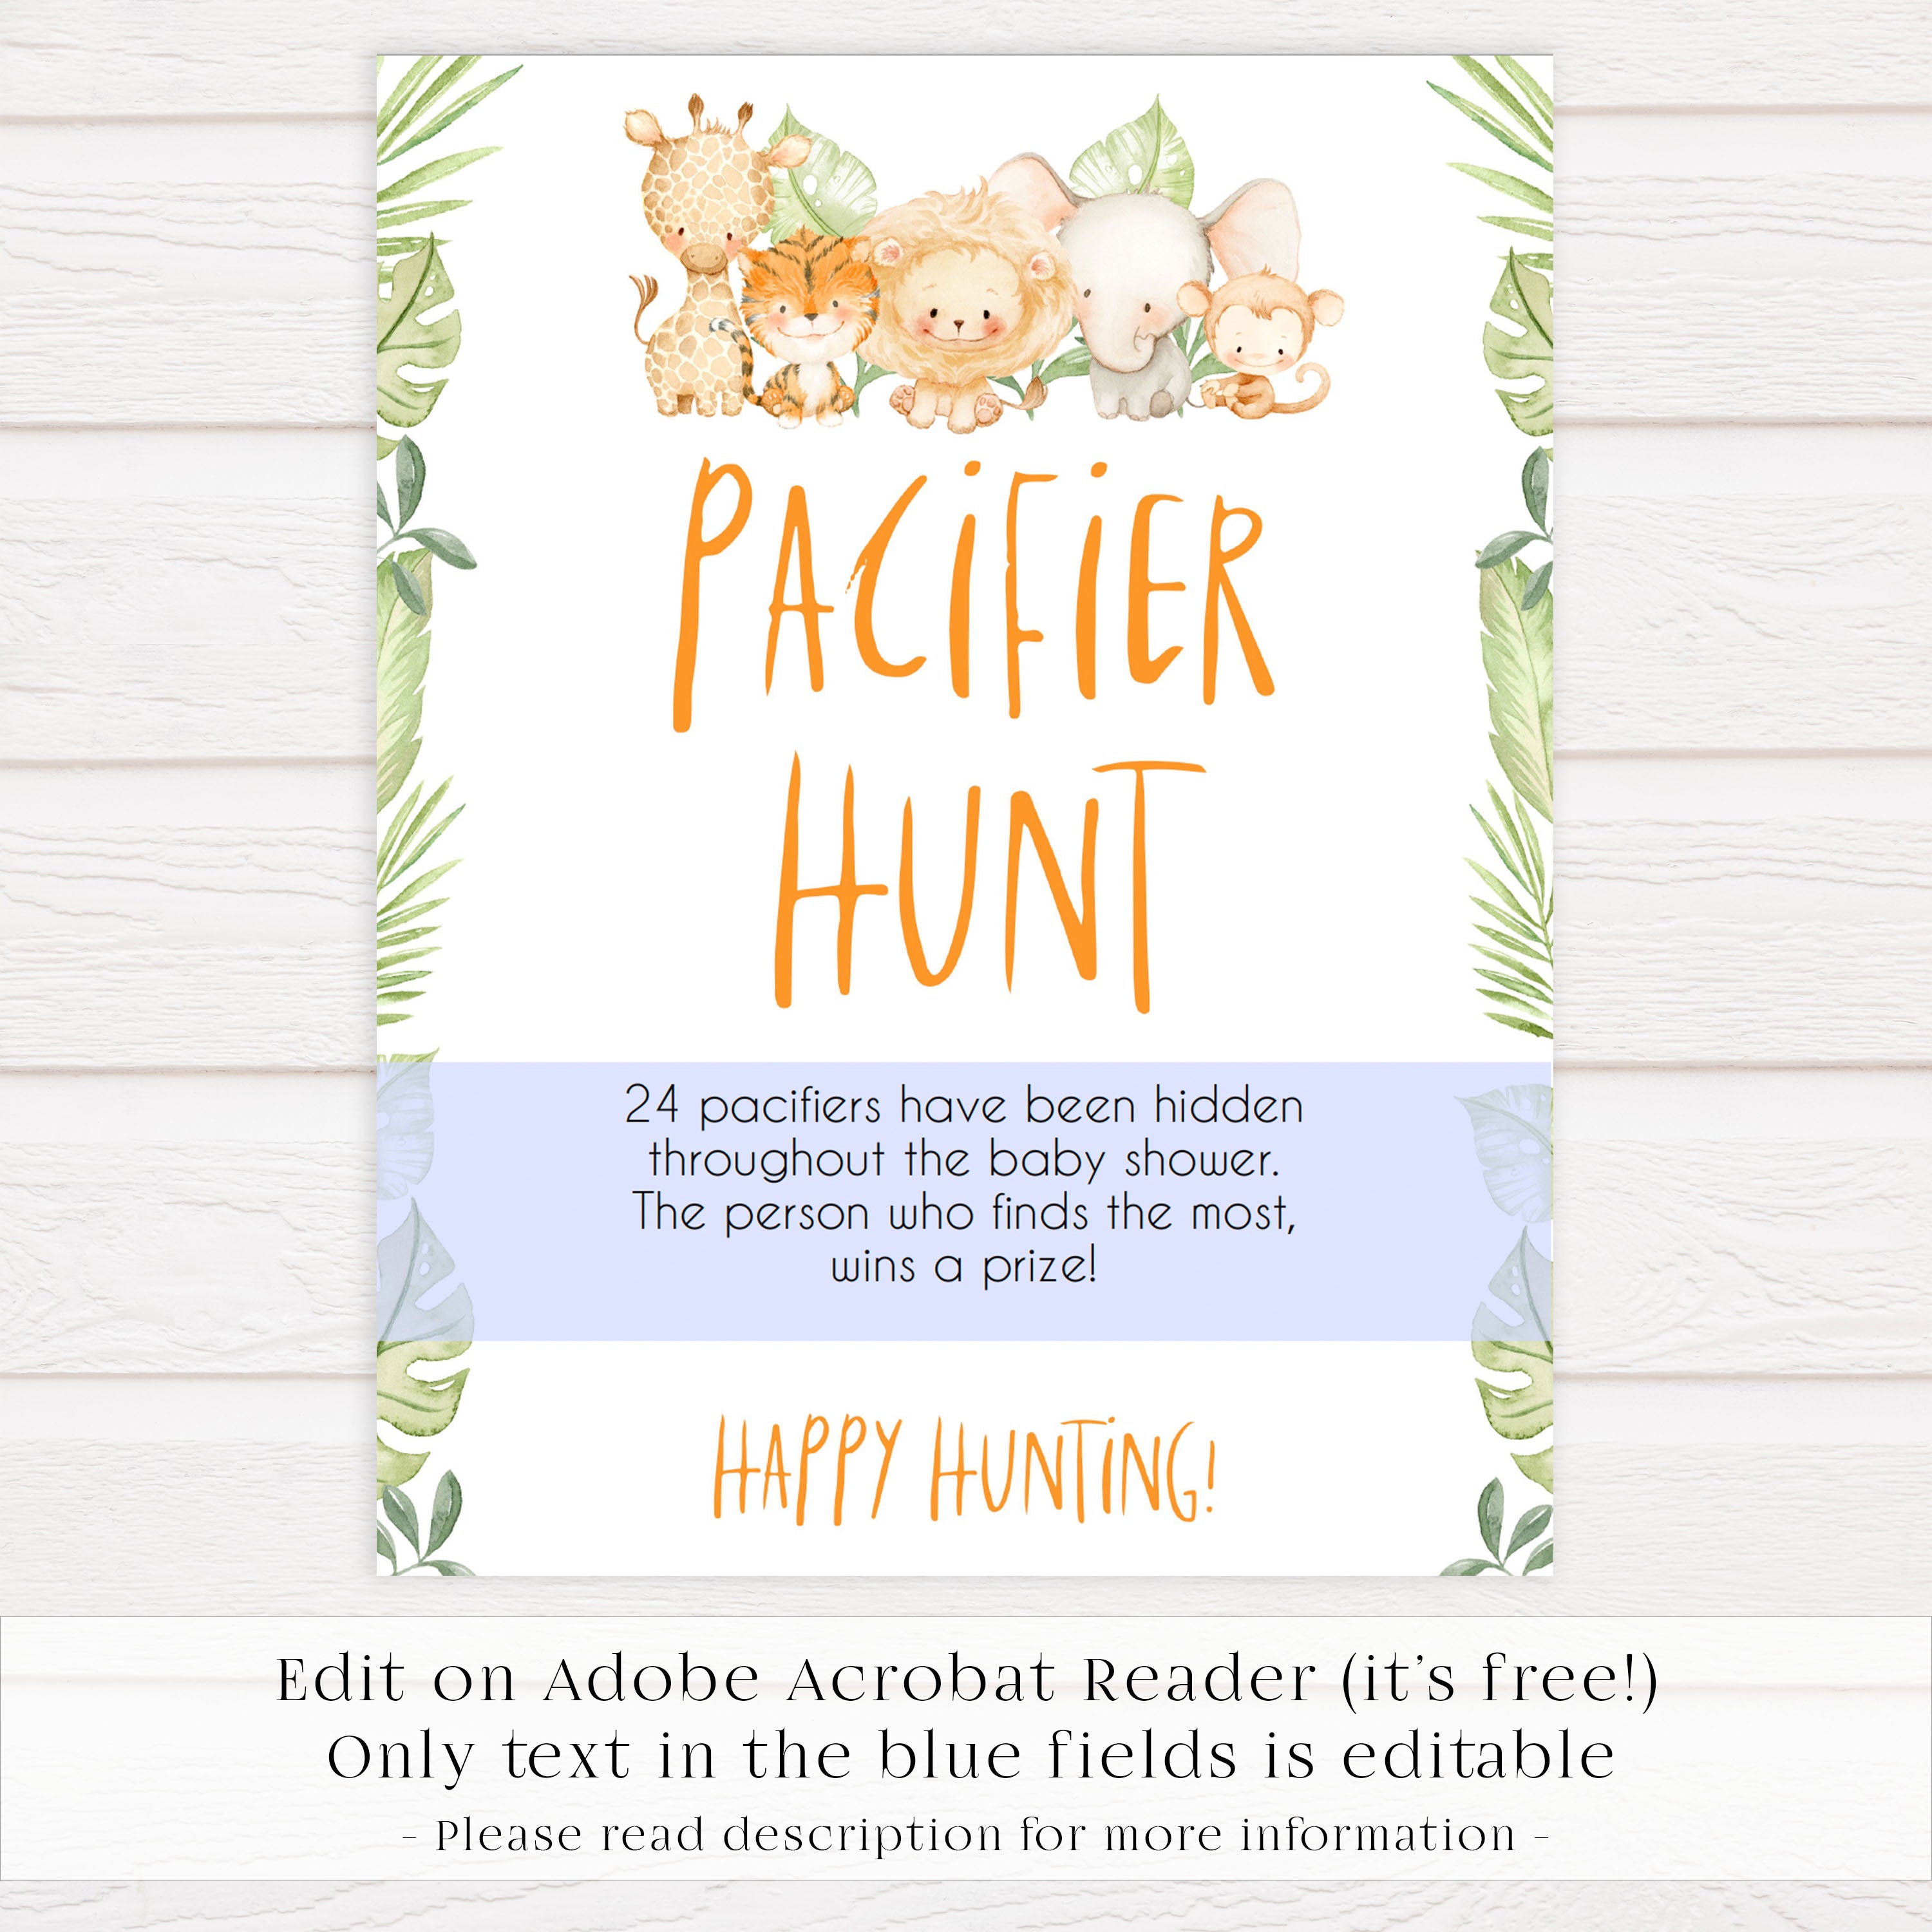 pacifier hunt game, Printable baby shower games, safari animals baby games, baby shower games, fun baby shower ideas, top baby shower ideas, safari animals baby shower, baby shower games, fun baby shower ideaspacifier hunt game, Printable baby shower games, safari animals baby games, baby shower games, fun baby shower ideas, top baby shower ideas, safari animals baby shower, baby shower games, fun baby shower ideas